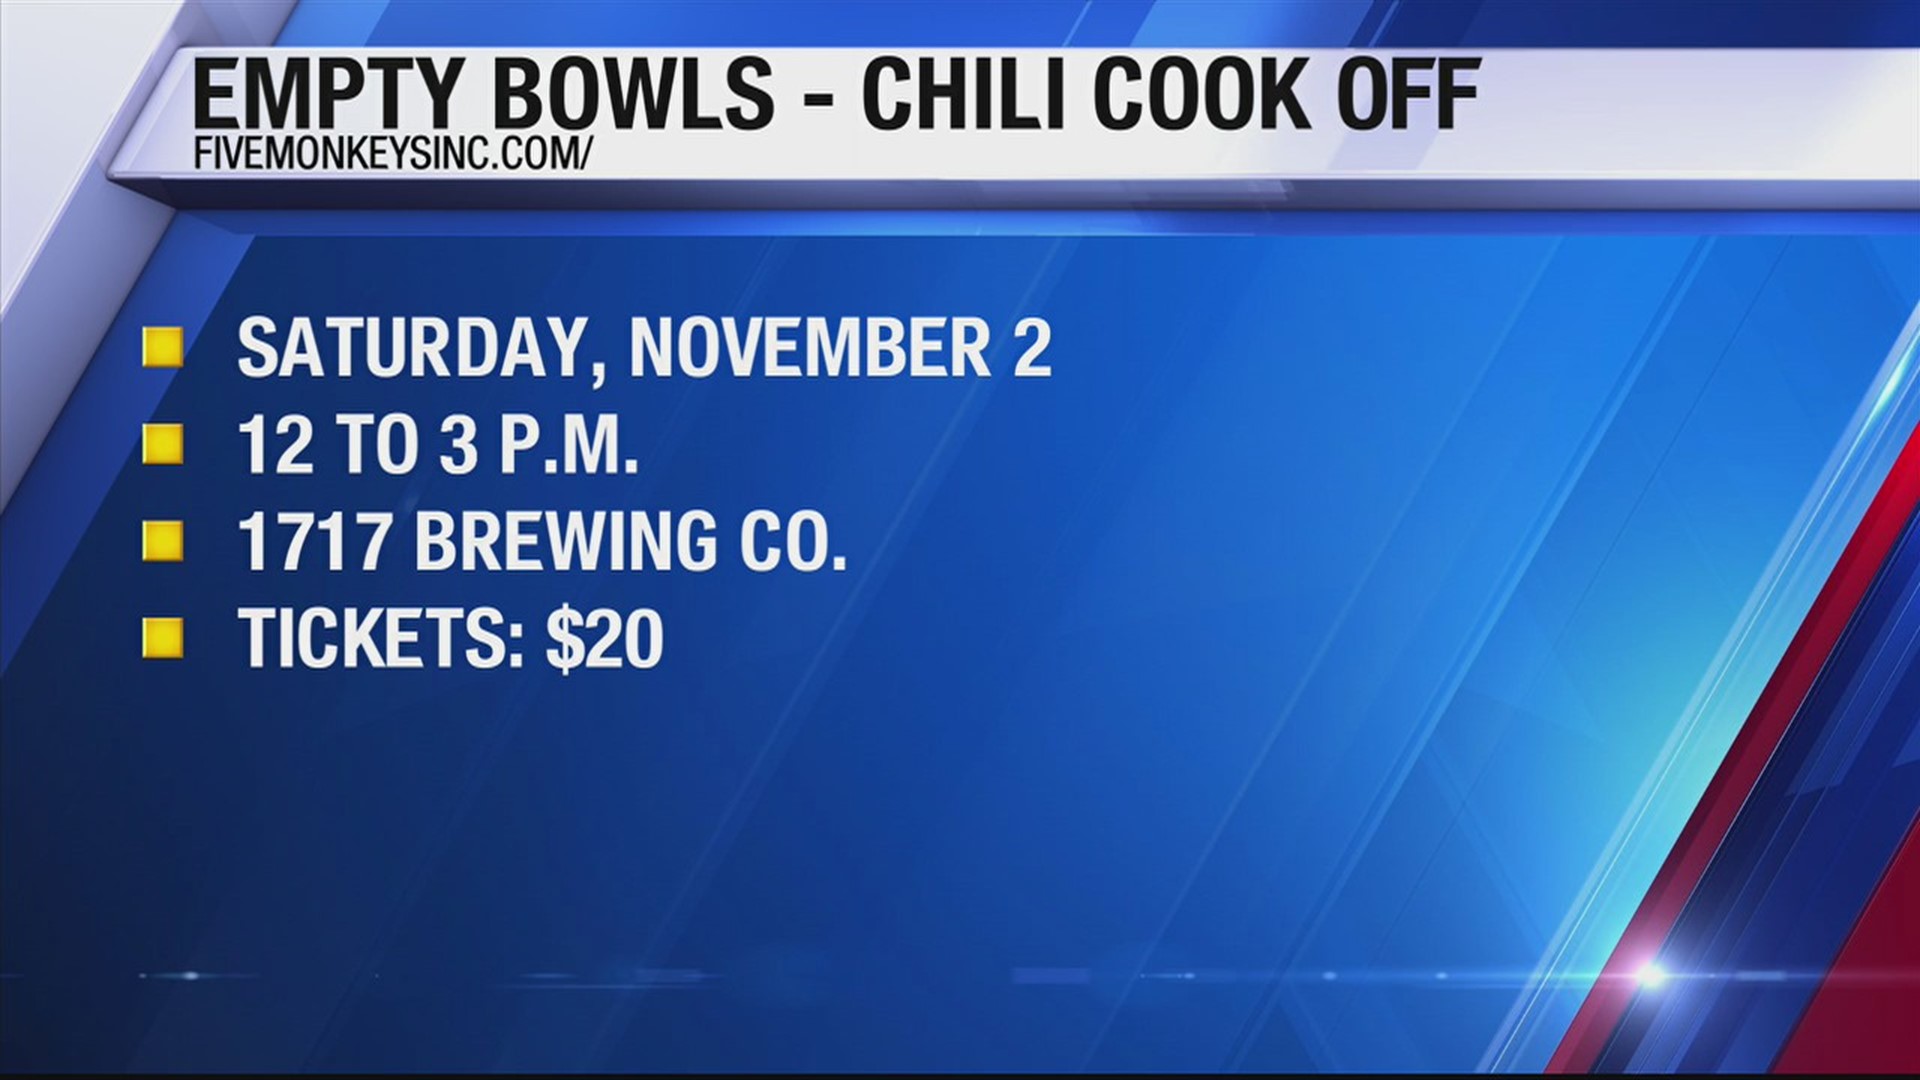 This weekend, you can help fight hunger one bowl at a time as Five Monkeys Inc. and 1717 Brewing Co. host the Empty Bowls Chili Cook Off fundraiser.